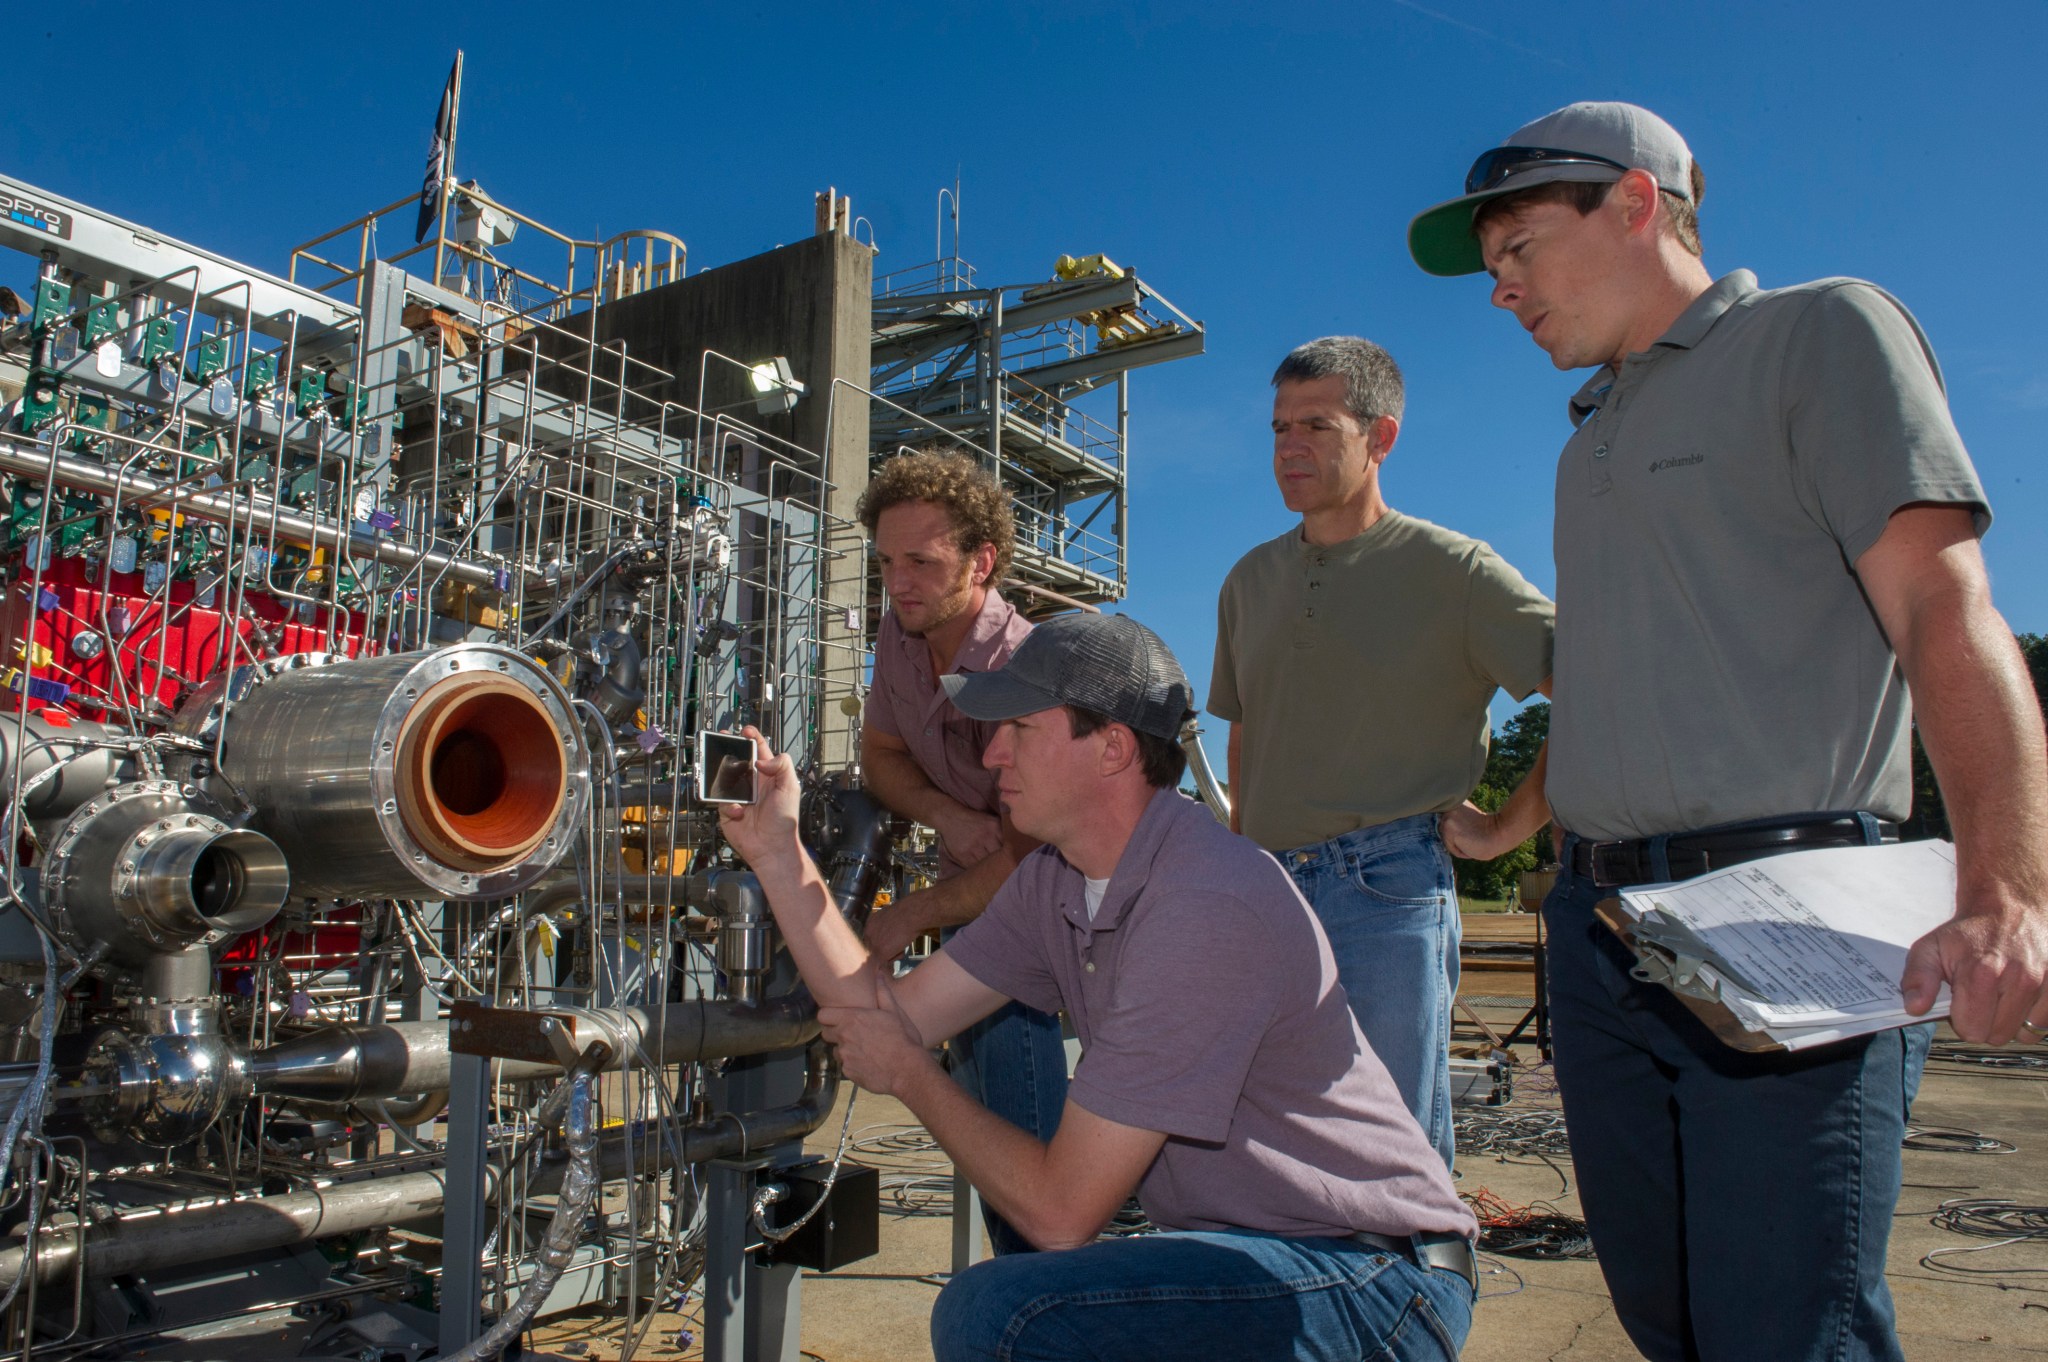 Engineers prepare a 3-D printed breadboard engine made up of 75 percent of the parts needed to build a rocket engine for a test.